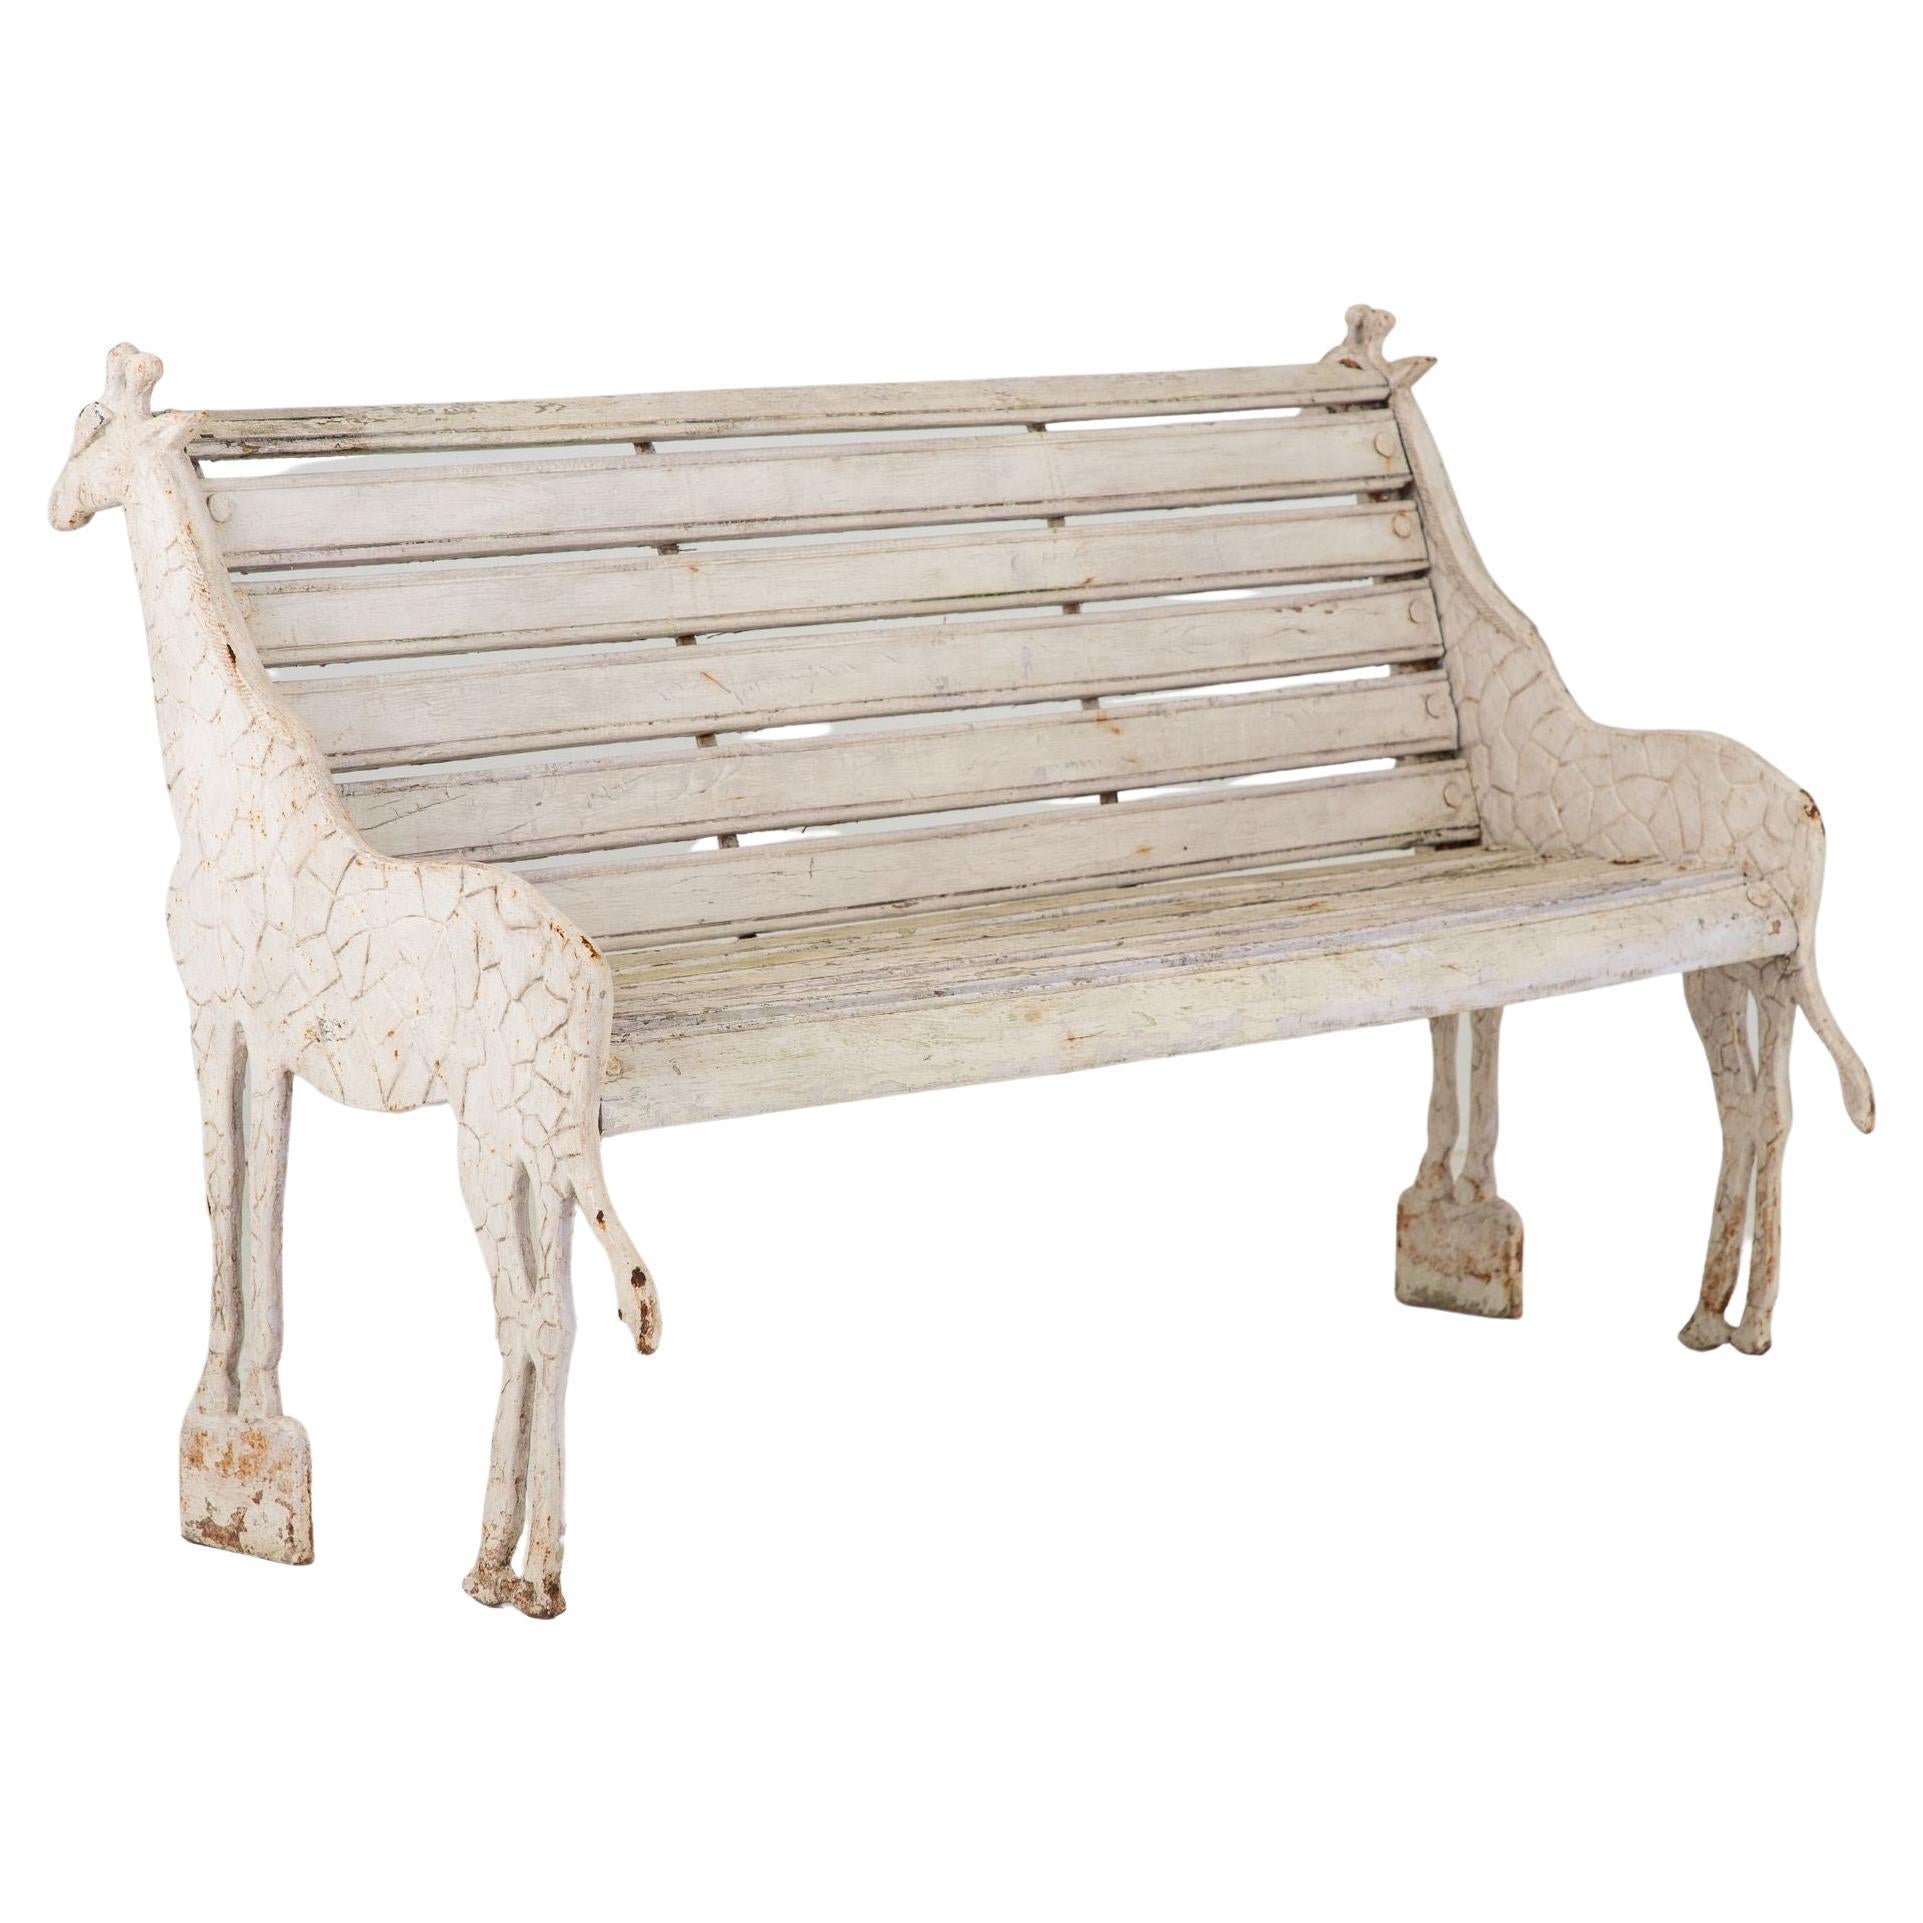 Giraffe Bench from Colchester Zoo in England, 20th Century For Sale